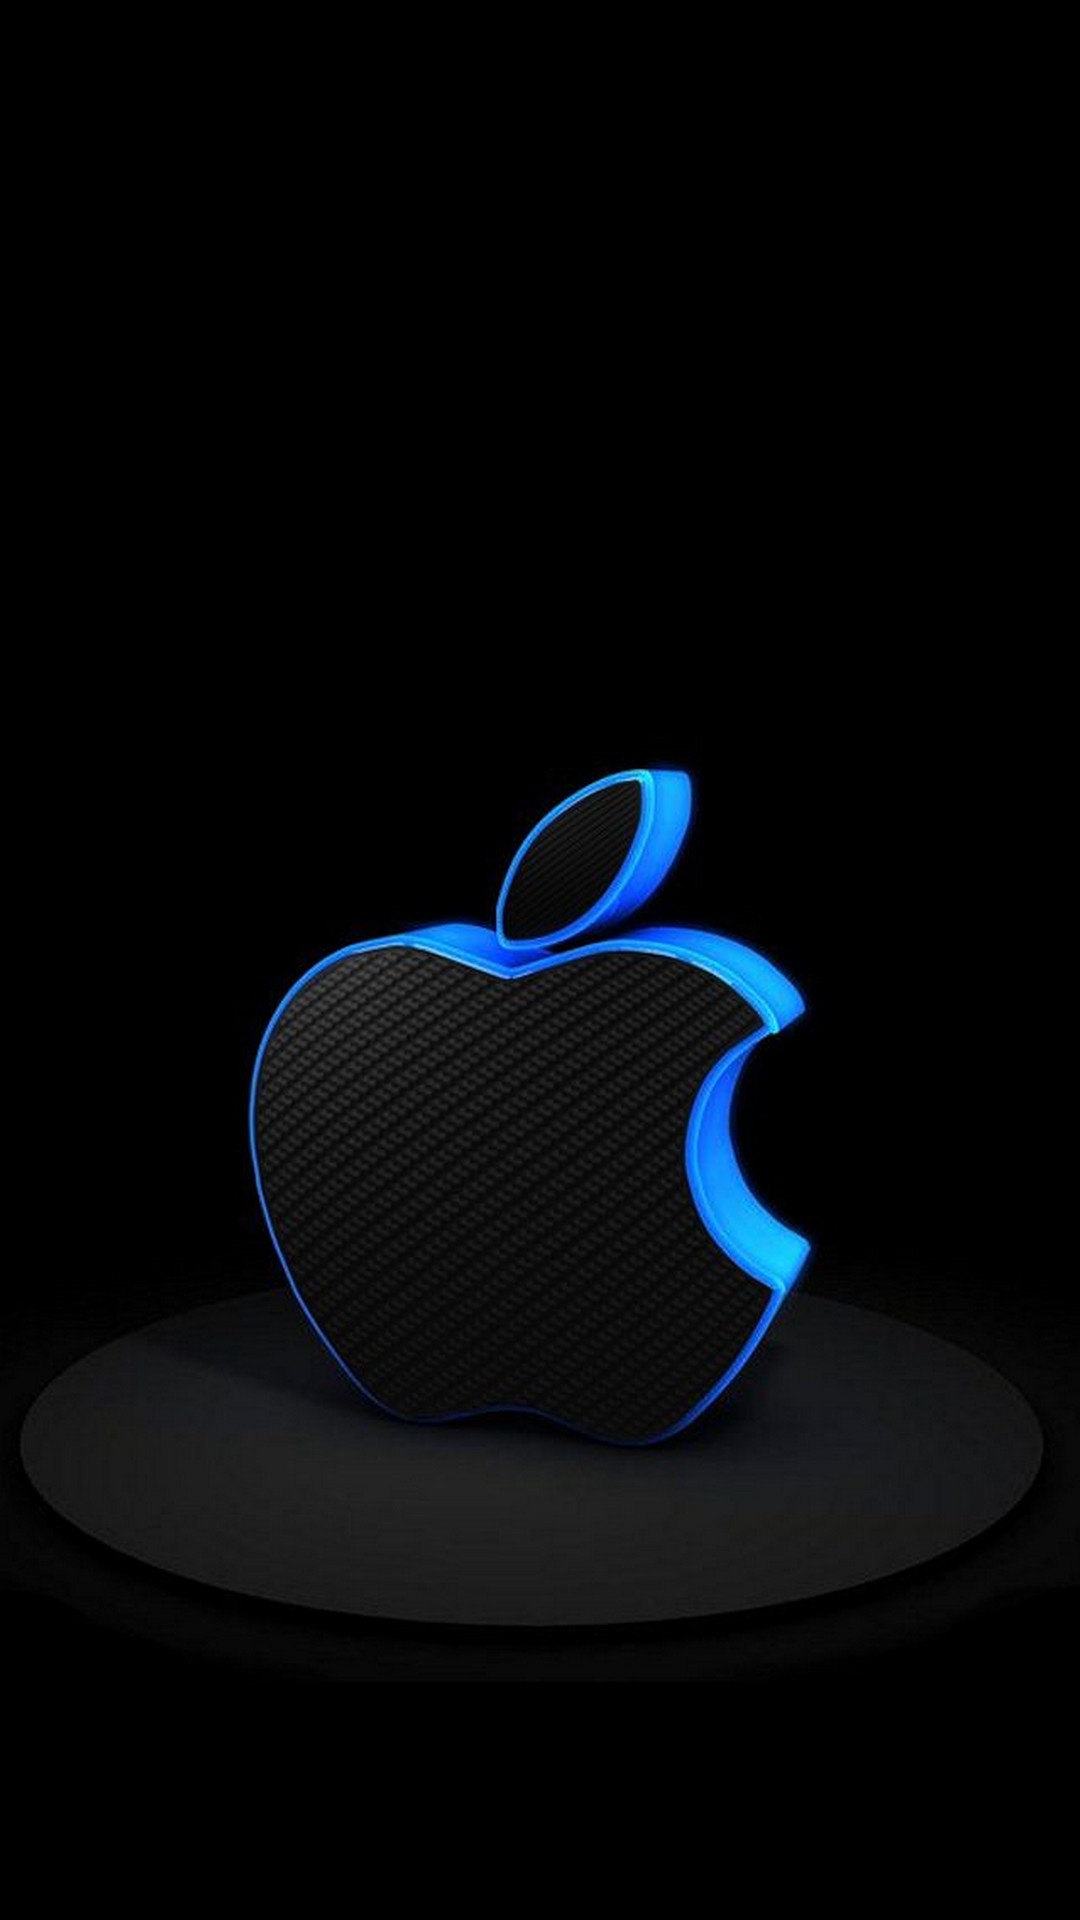 Wallpapers 3d For Iphone Image Num 8